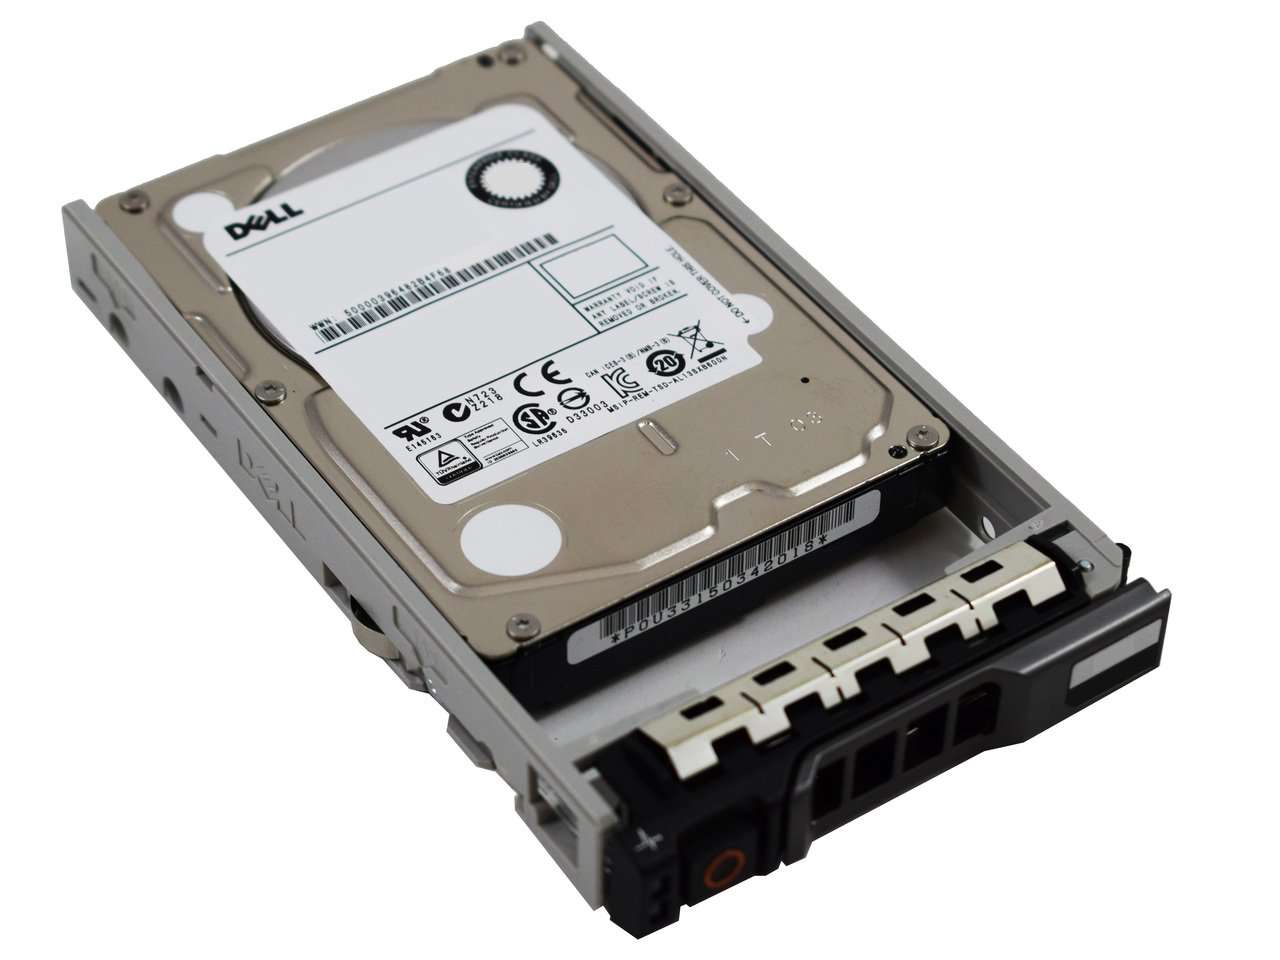 Dell G13 867CY 300GB 15K RPM SAS 6Gb/s 512n 2.5" Manufacturer Recertified HDD